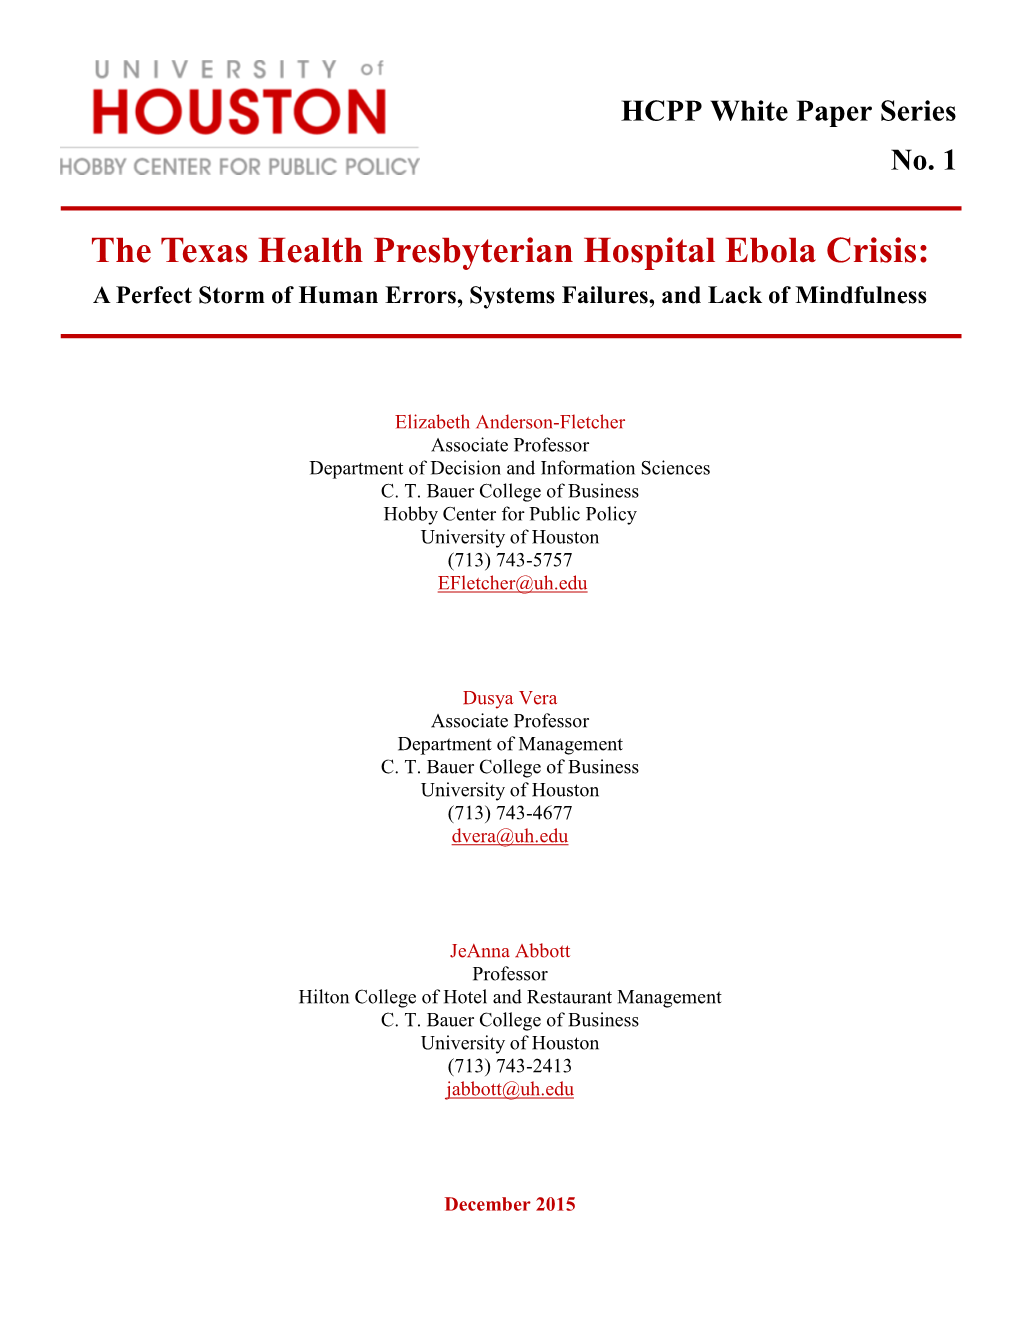 The Texas Health Presbyterian Hospital Ebola Crisis: a Perfect Storm of Human Errors, Systems Failures, and Lack of Mindfulness